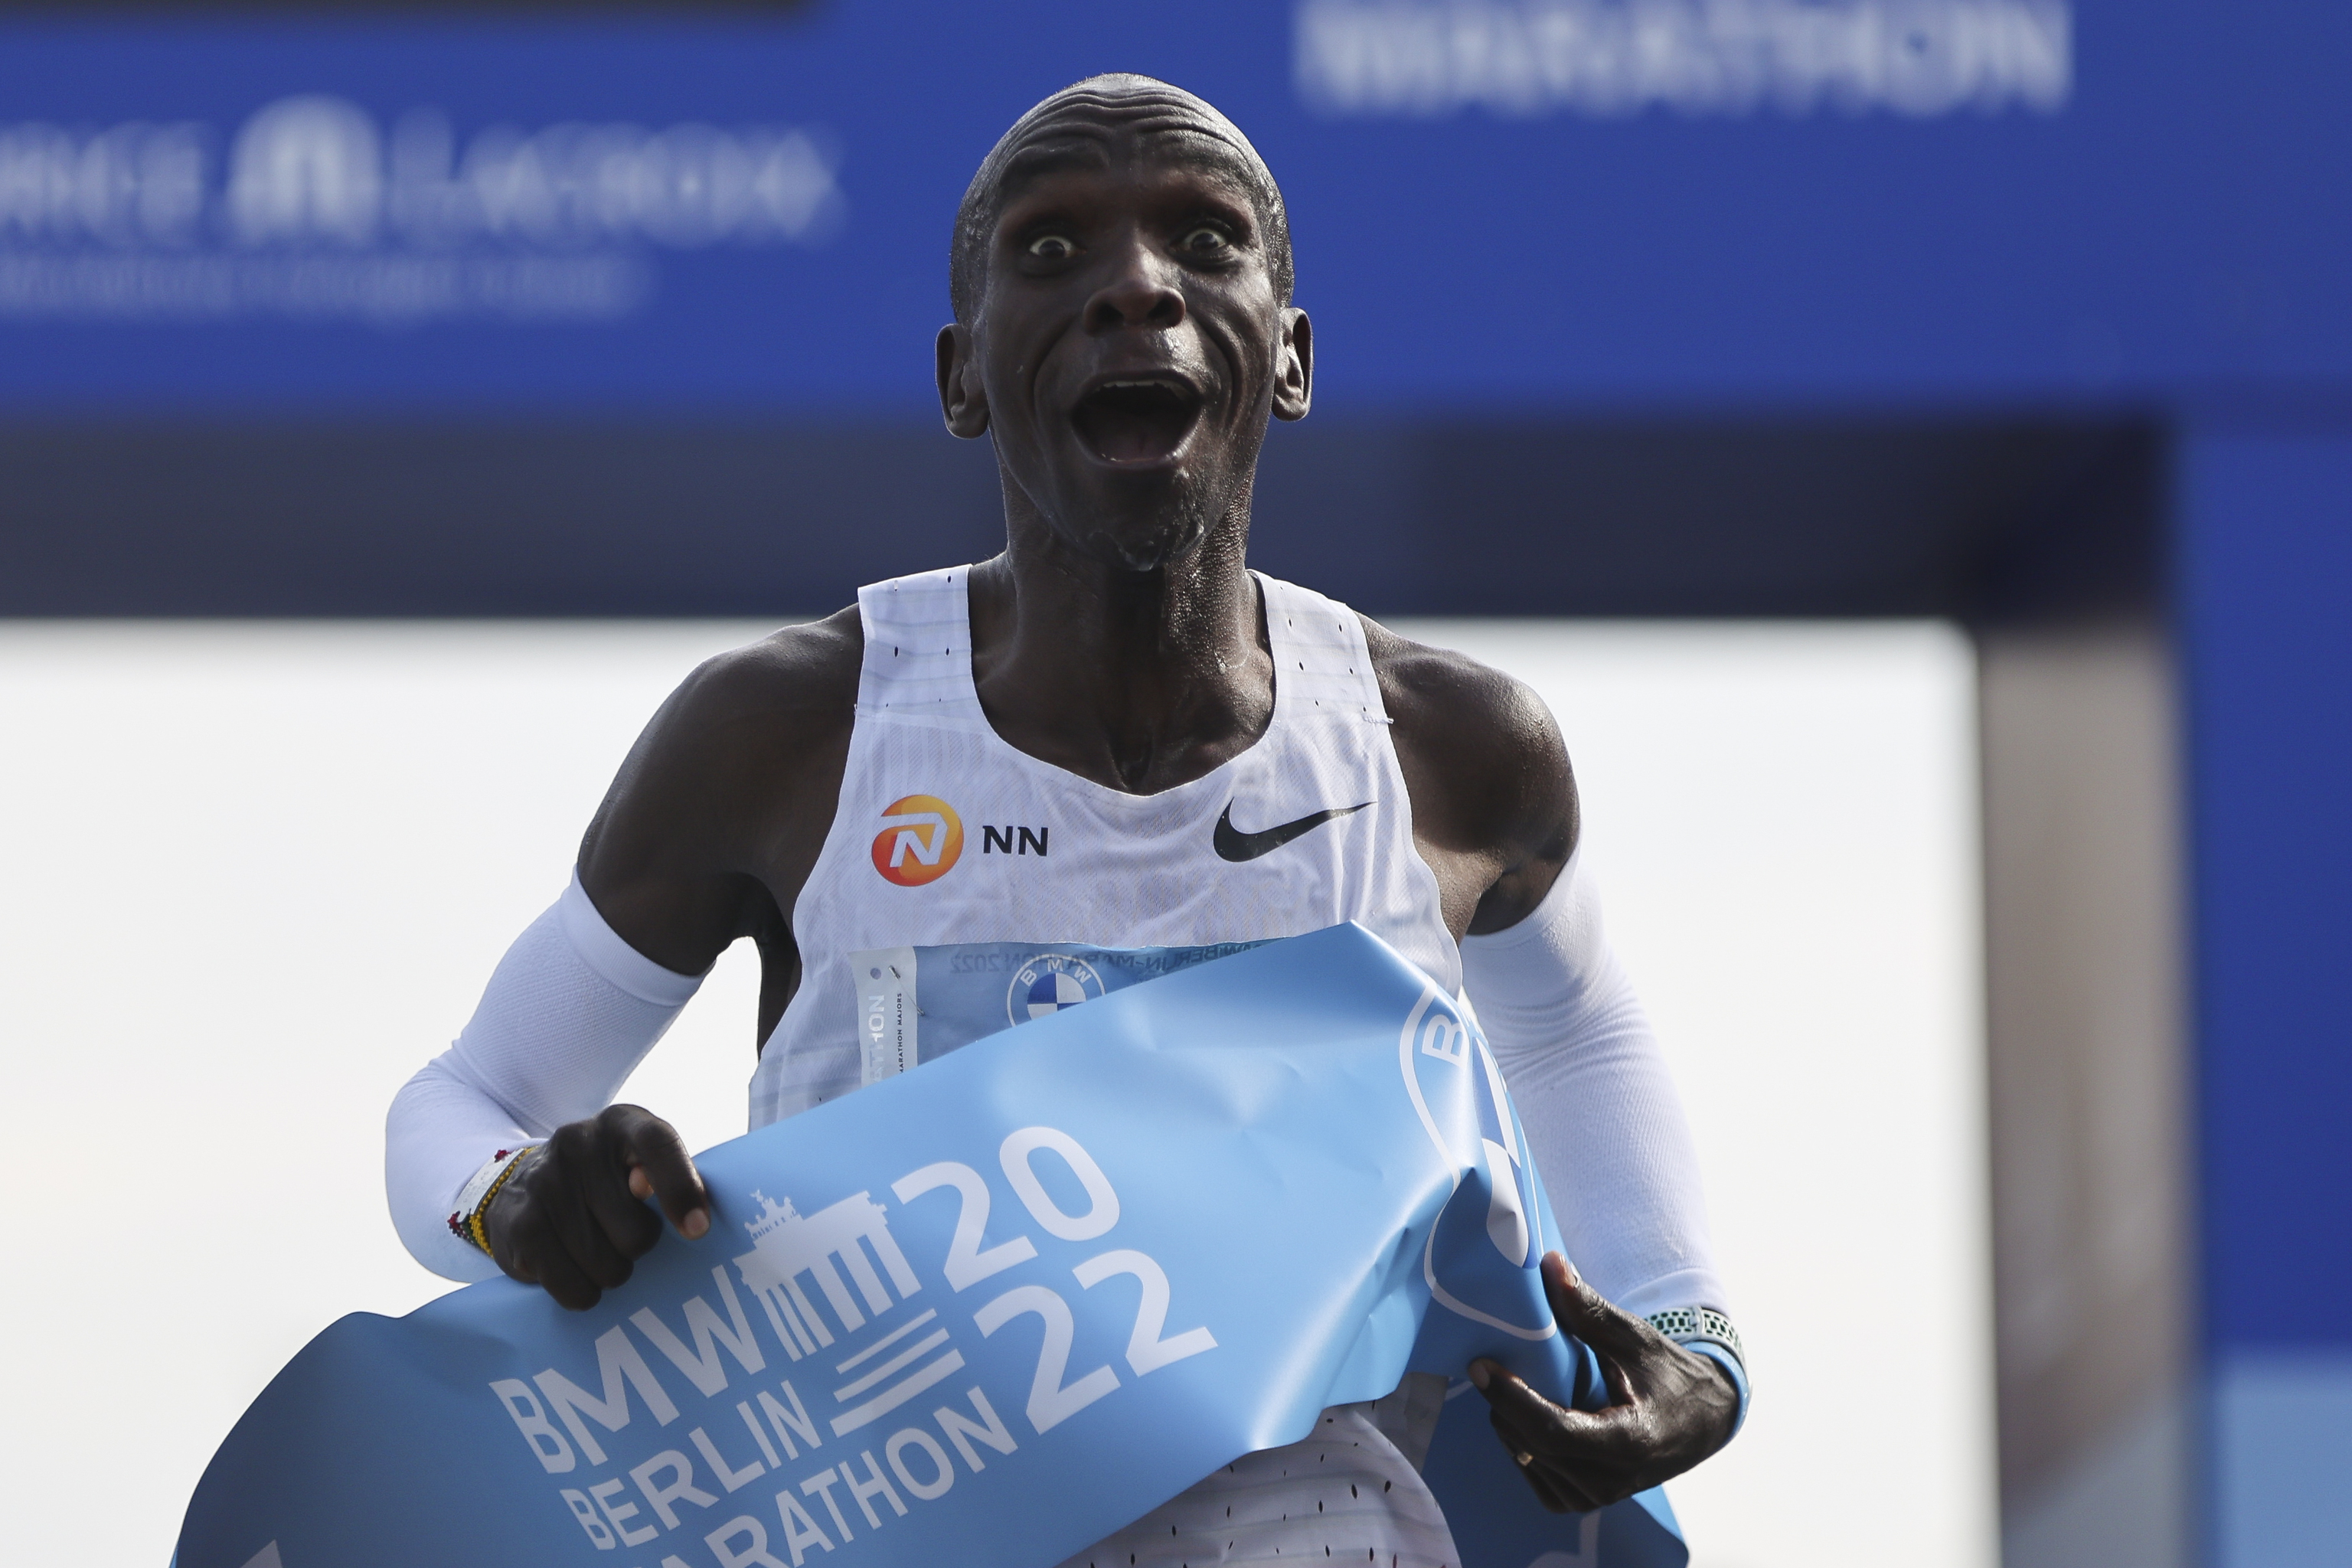 Kenya's Eliud  lt;HIT gt;Kipchoge lt;/HIT gt; crosses the line to win the Berlin Marathon in Berlin, Germany, Sunday, Sept. 25, 2022. Olympic champion Eliud  lt;HIT gt;Kipchoge lt;/HIT gt; has bettered his own world record in the Berlin Marathon.  lt;HIT gt;Kipchoge lt;/HIT gt; clocked 2:01:09 on Sunday to shave 30 seconds off his previous best-mark of 2:01:39 from the same course in 2018. (AP Photo/Christoph Soeder)